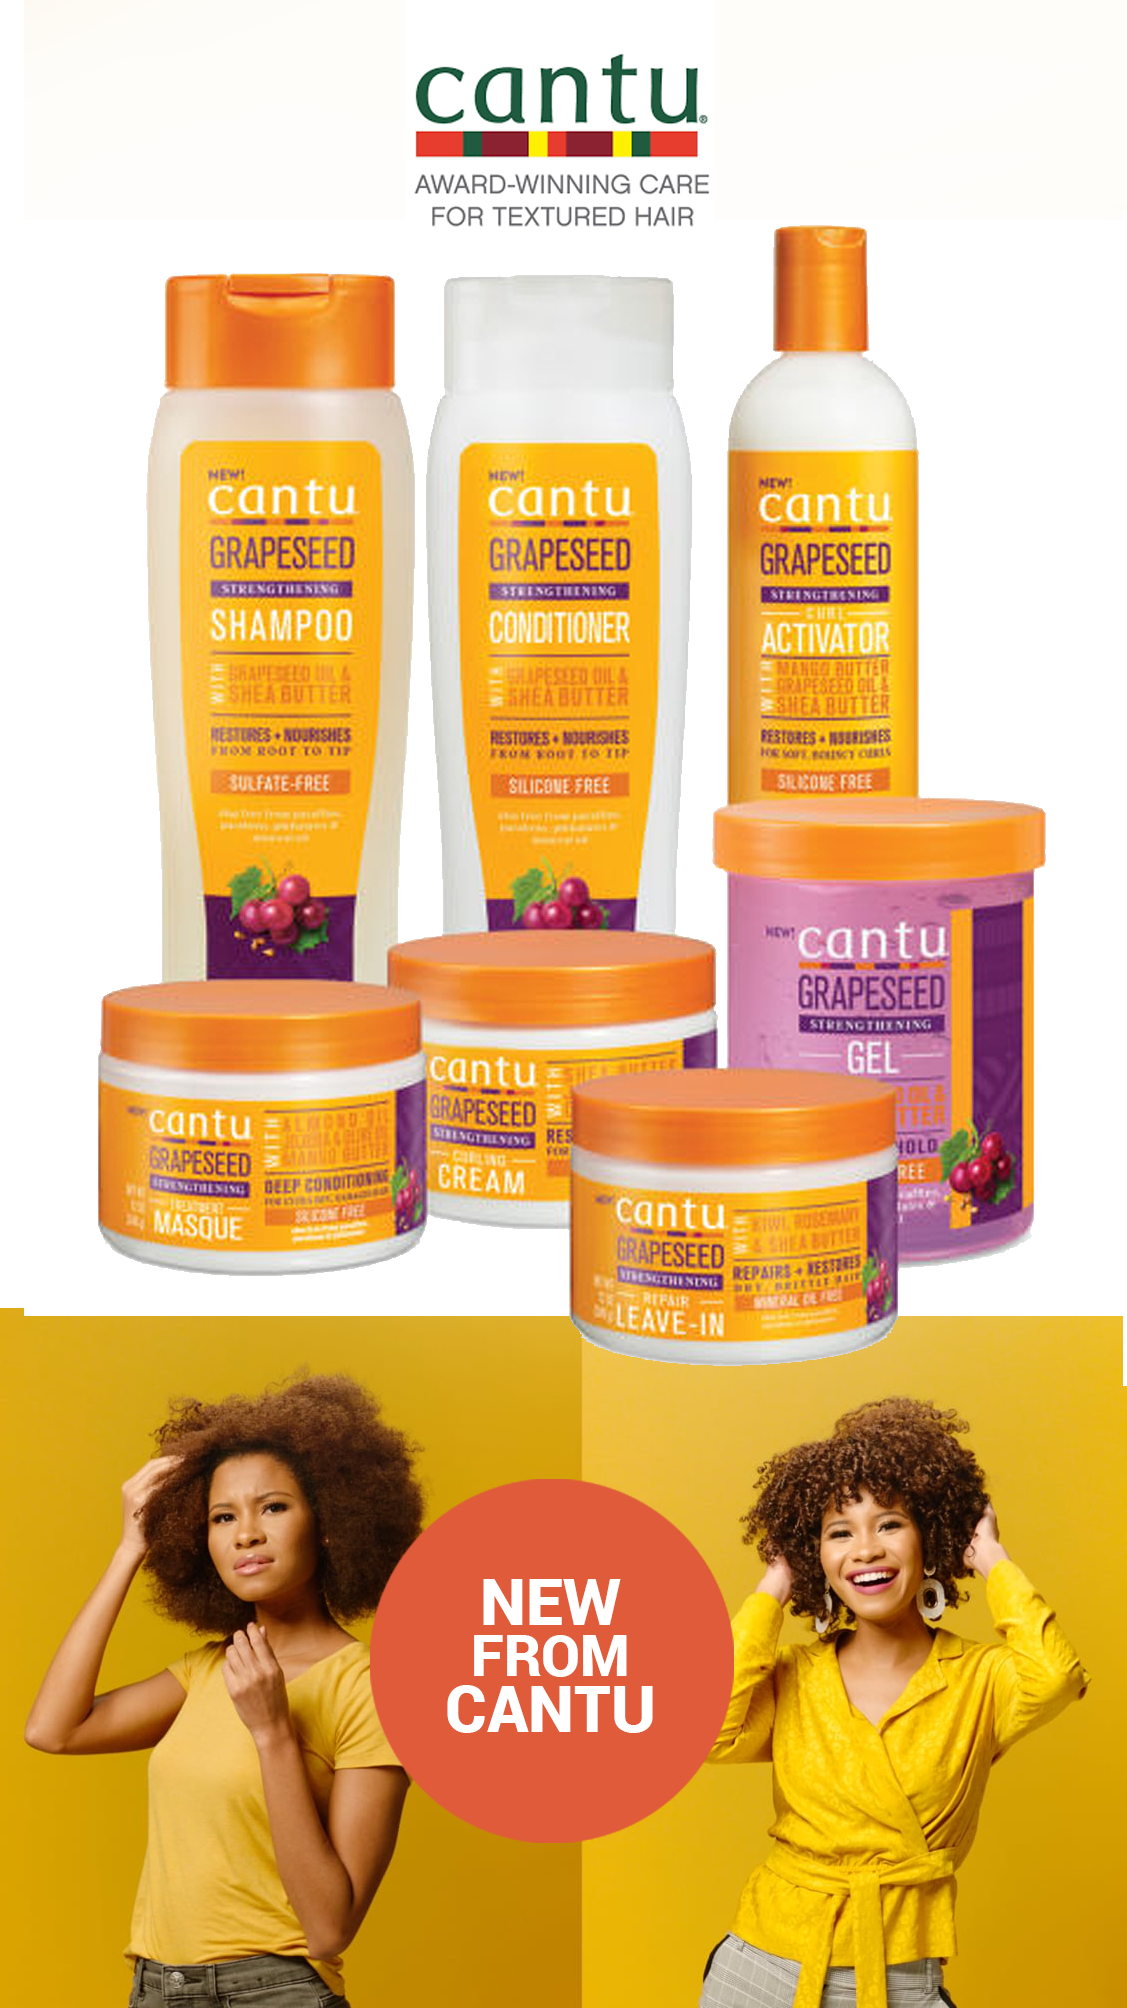 https://newedition.mv/?s=cantu&post_type=product